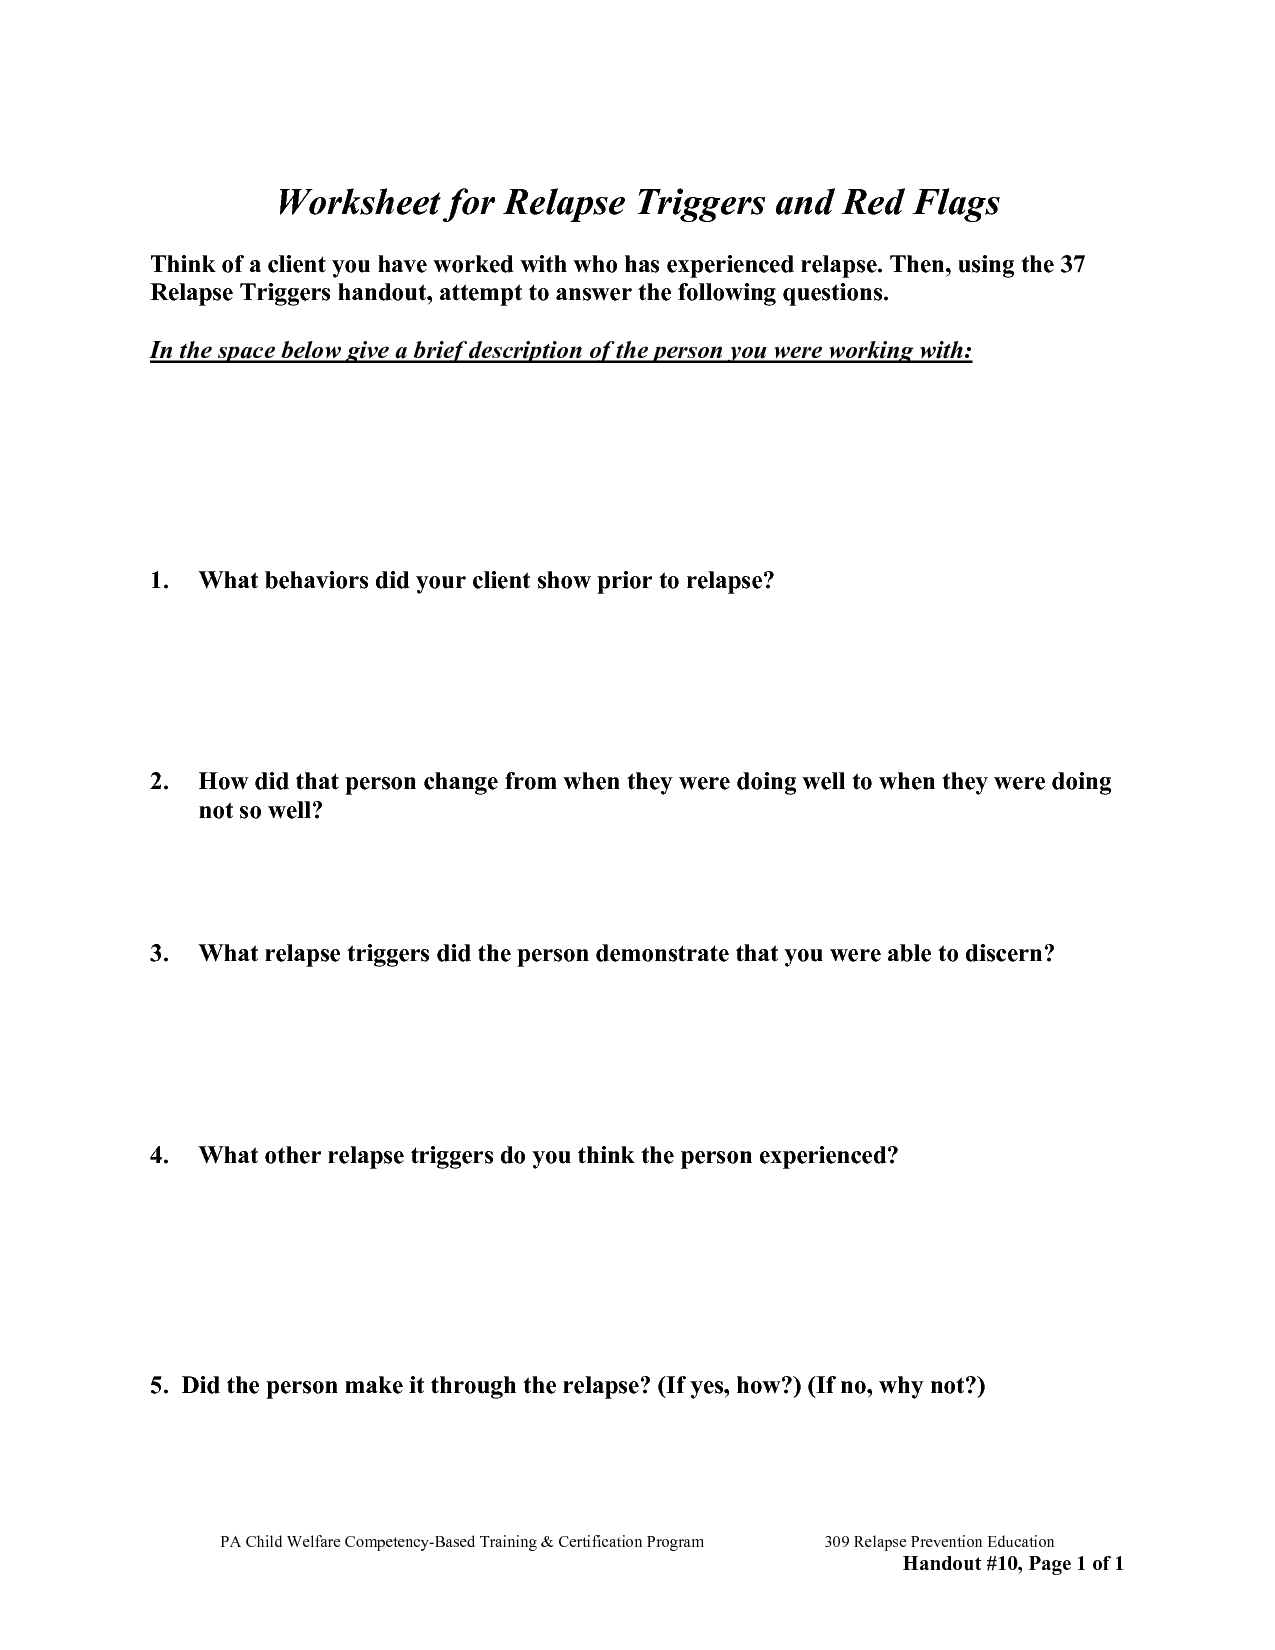 13 Best Images of Addiction And Recovery Worksheets DBT Behavior